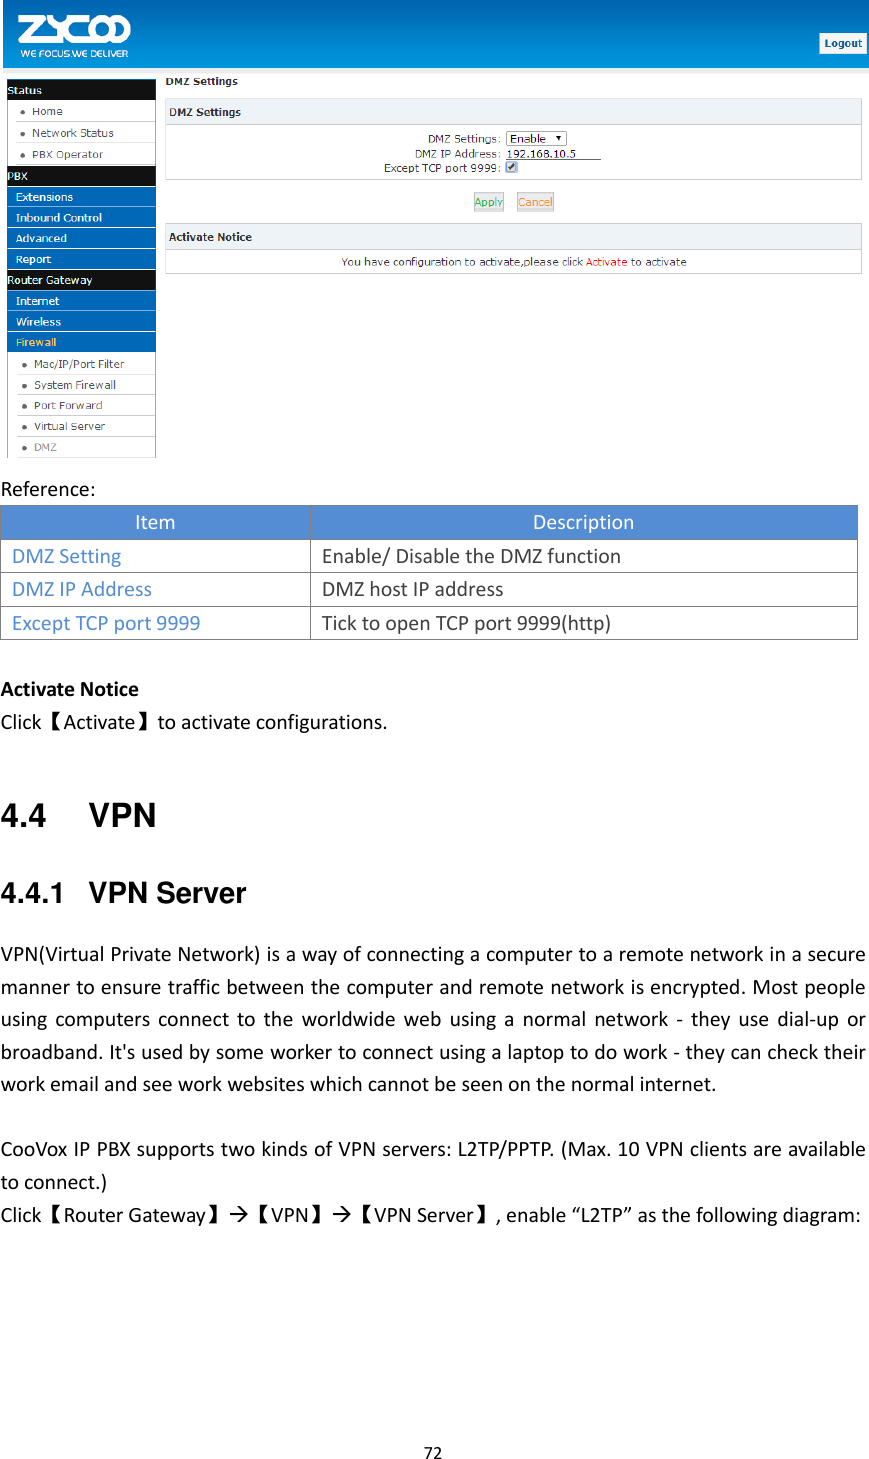  72   Reference: Item Description DMZ Setting Enable/ Disable the DMZ function DMZ IP Address DMZ host IP address   Except TCP port 9999 Tick to open TCP port 9999(http)  Activate Notice Click【Activate】to activate configurations.  4.4 VPN 4.4.1  VPN Server VPN(Virtual Private Network) is a way of connecting a computer to a remote network in a secure manner to ensure traffic between the computer and remote network is encrypted. Most people using  computers  connect  to  the  worldwide  web  using  a  normal  network  -  they  use  dial-up or broadband. It&apos;s used by some worker to connect using a laptop to do work - they can check their work email and see work websites which cannot be seen on the normal internet.  CooVox IP PBX supports two kinds of VPN servers: L2TP/PPTP. (Max. 10 VPN clients are available to connect.) Click【Router Gateway】【VPN】【VPN Server】, enable “L2TP” as the following diagram: 